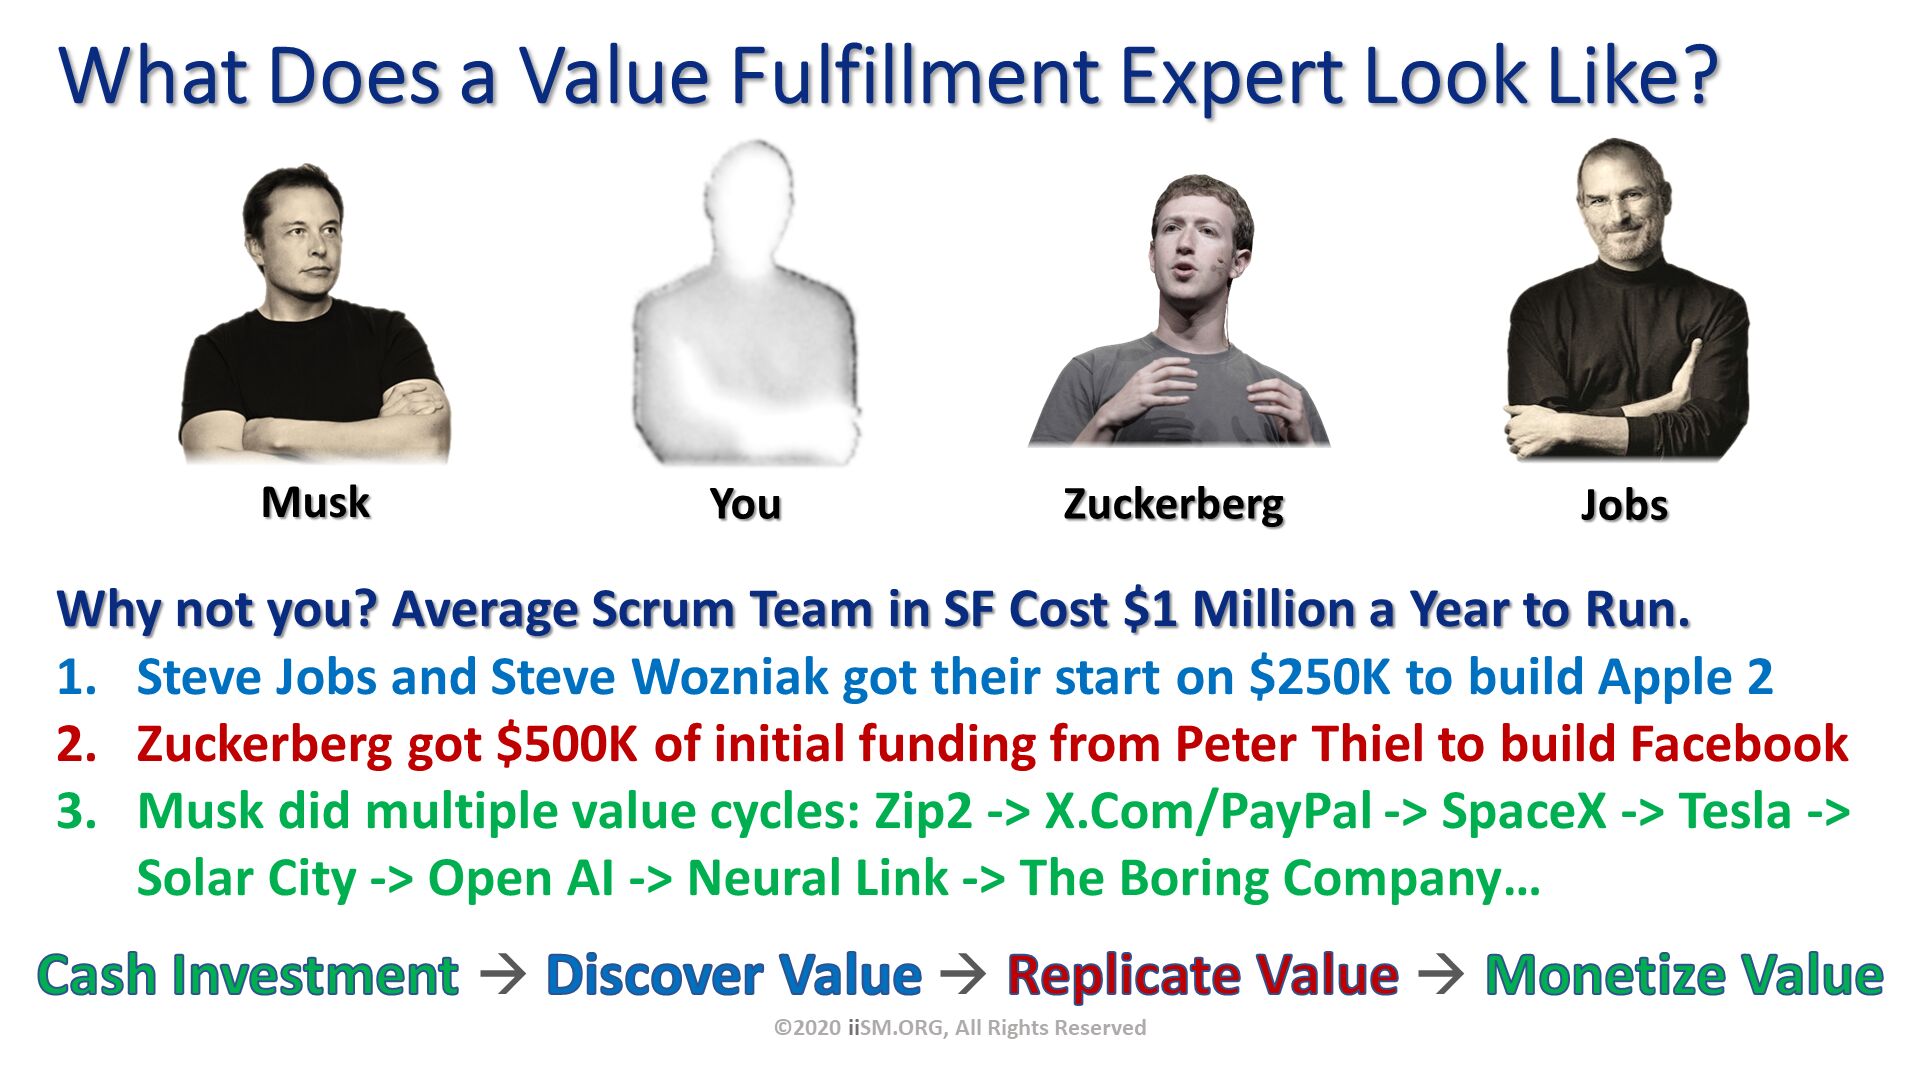 What Does a Value Fulfillment Expert Look Like?. Cash Investment  Discover Value  Replicate Value  Monetize Value. Musk. You. Zuckerberg. Jobs. Why not you? Average Scrum Team in SF Cost $1 Million a Year to Run.
Steve Jobs and Steve Wozniak got their start on $250K to build Apple 2
Zuckerberg got $500K of initial funding from Peter Thiel to build Facebook
Musk did multiple value cycles: Zip2 -> X.Com/PayPal -> SpaceX -> Tesla -> Solar City -> Open AI -> Neural Link -> The Boring Company…. ©2020 iiSM.ORG, All Rights Reserved. 